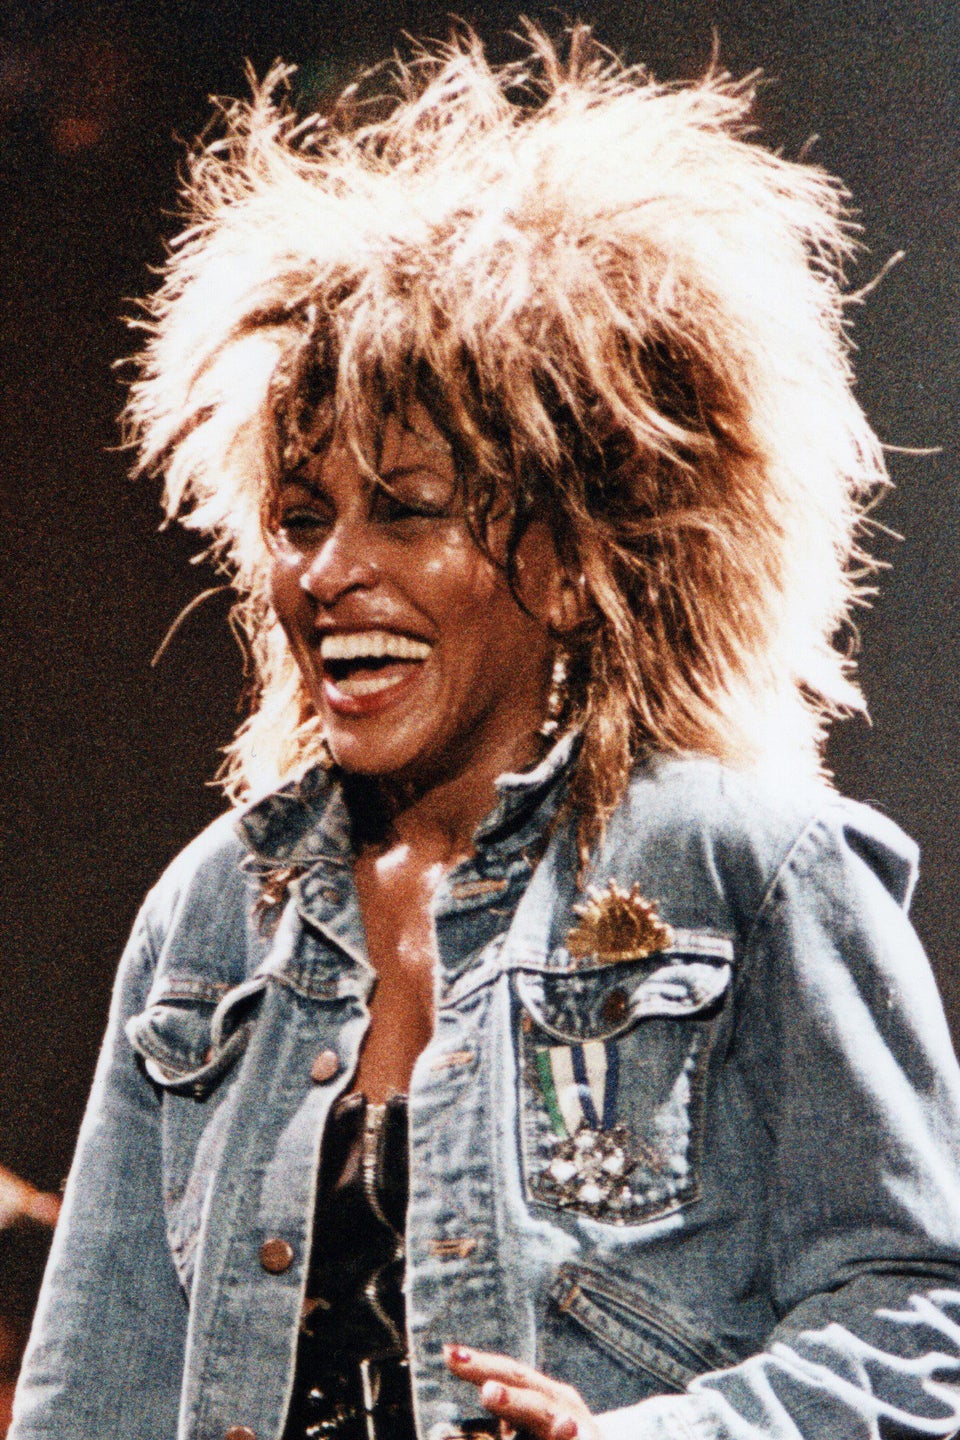 Tina Turner Has Forgiven Ike Turner, But She Hasn’t Forgotten His Abuse